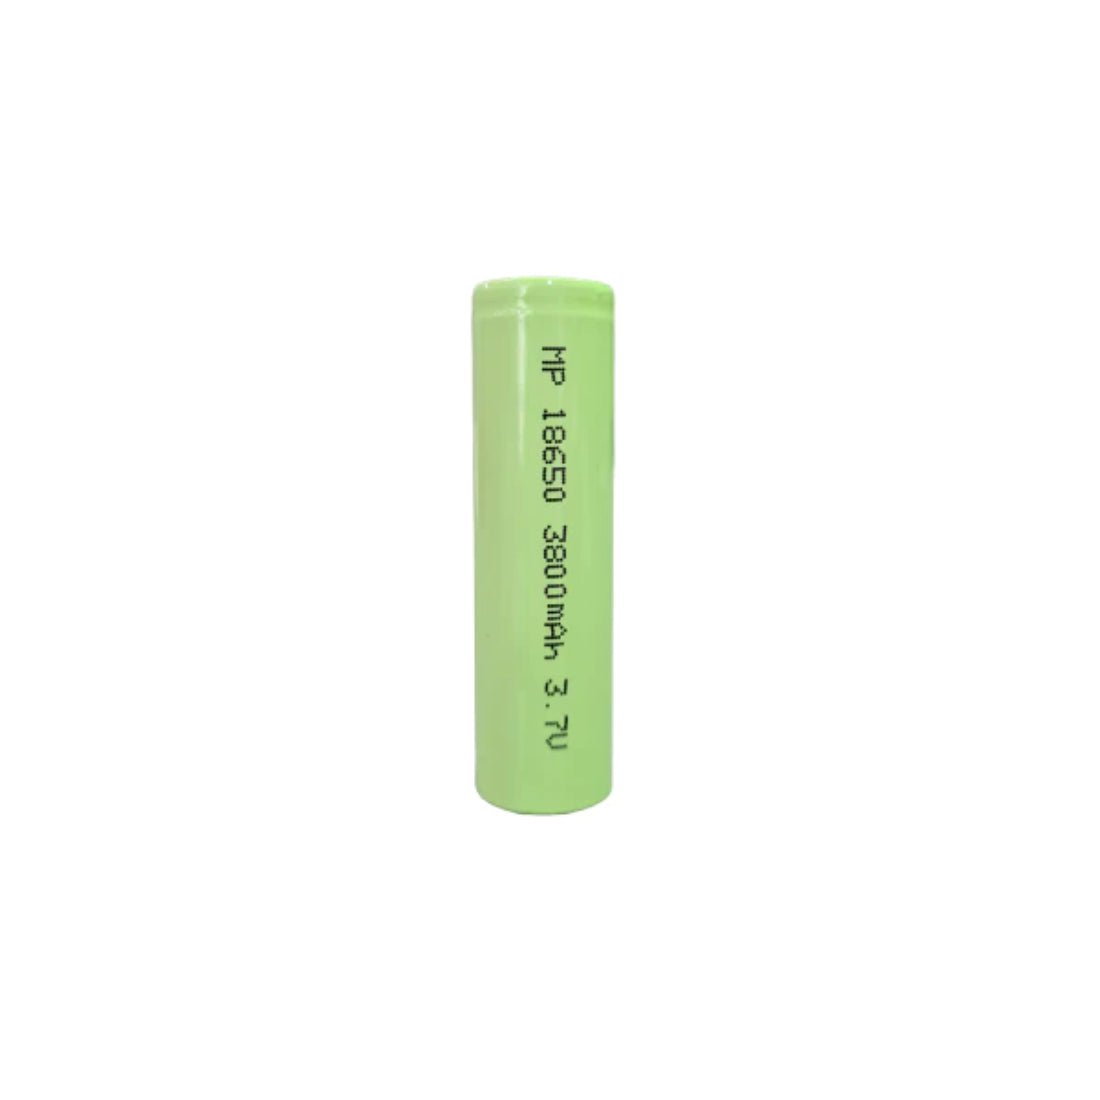 Lithium ion 3.7 V 3800mah rechargeable battery - 18650 - أكسسوار - Store 974 | ستور ٩٧٤